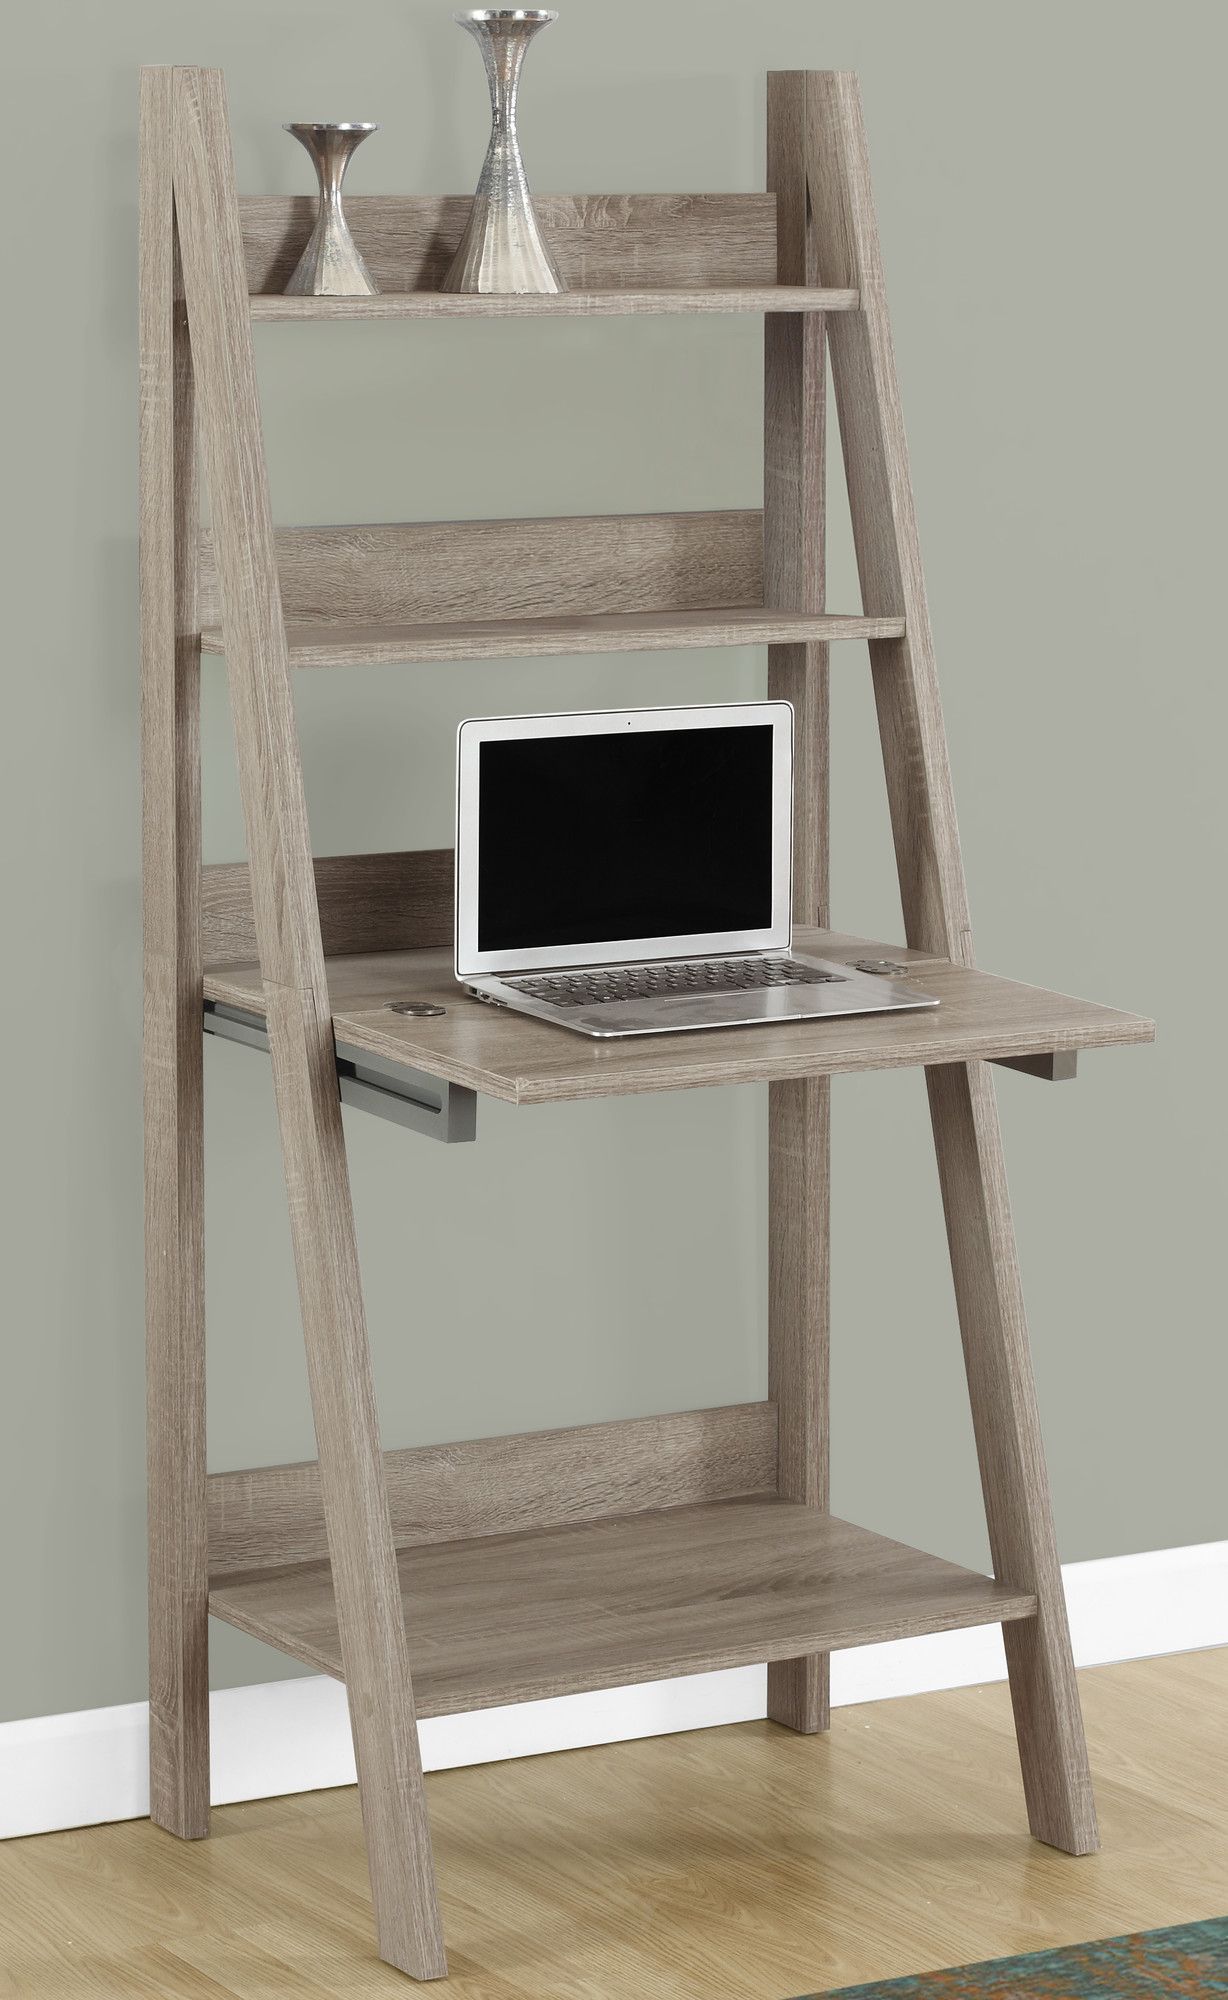 Shelby Leaning/ladder Desk | Home Office Furniture, Home Decor, Ladder Desk With Regard To White Ladder Desks (View 8 of 15)